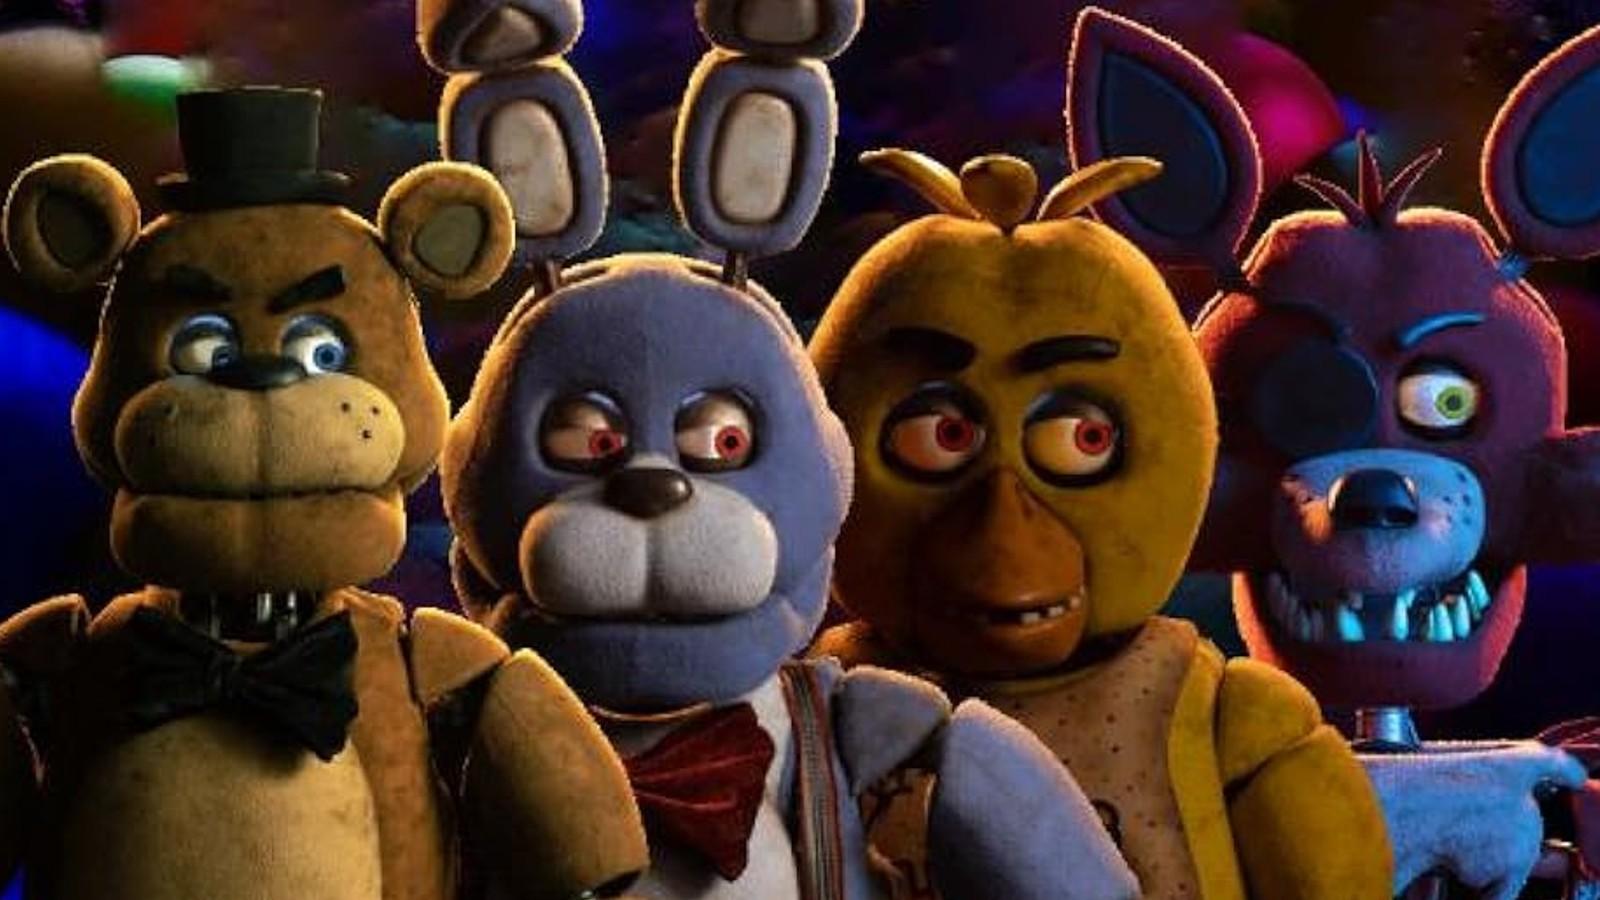 The evil animatronics in Five Nights at Freddy's.